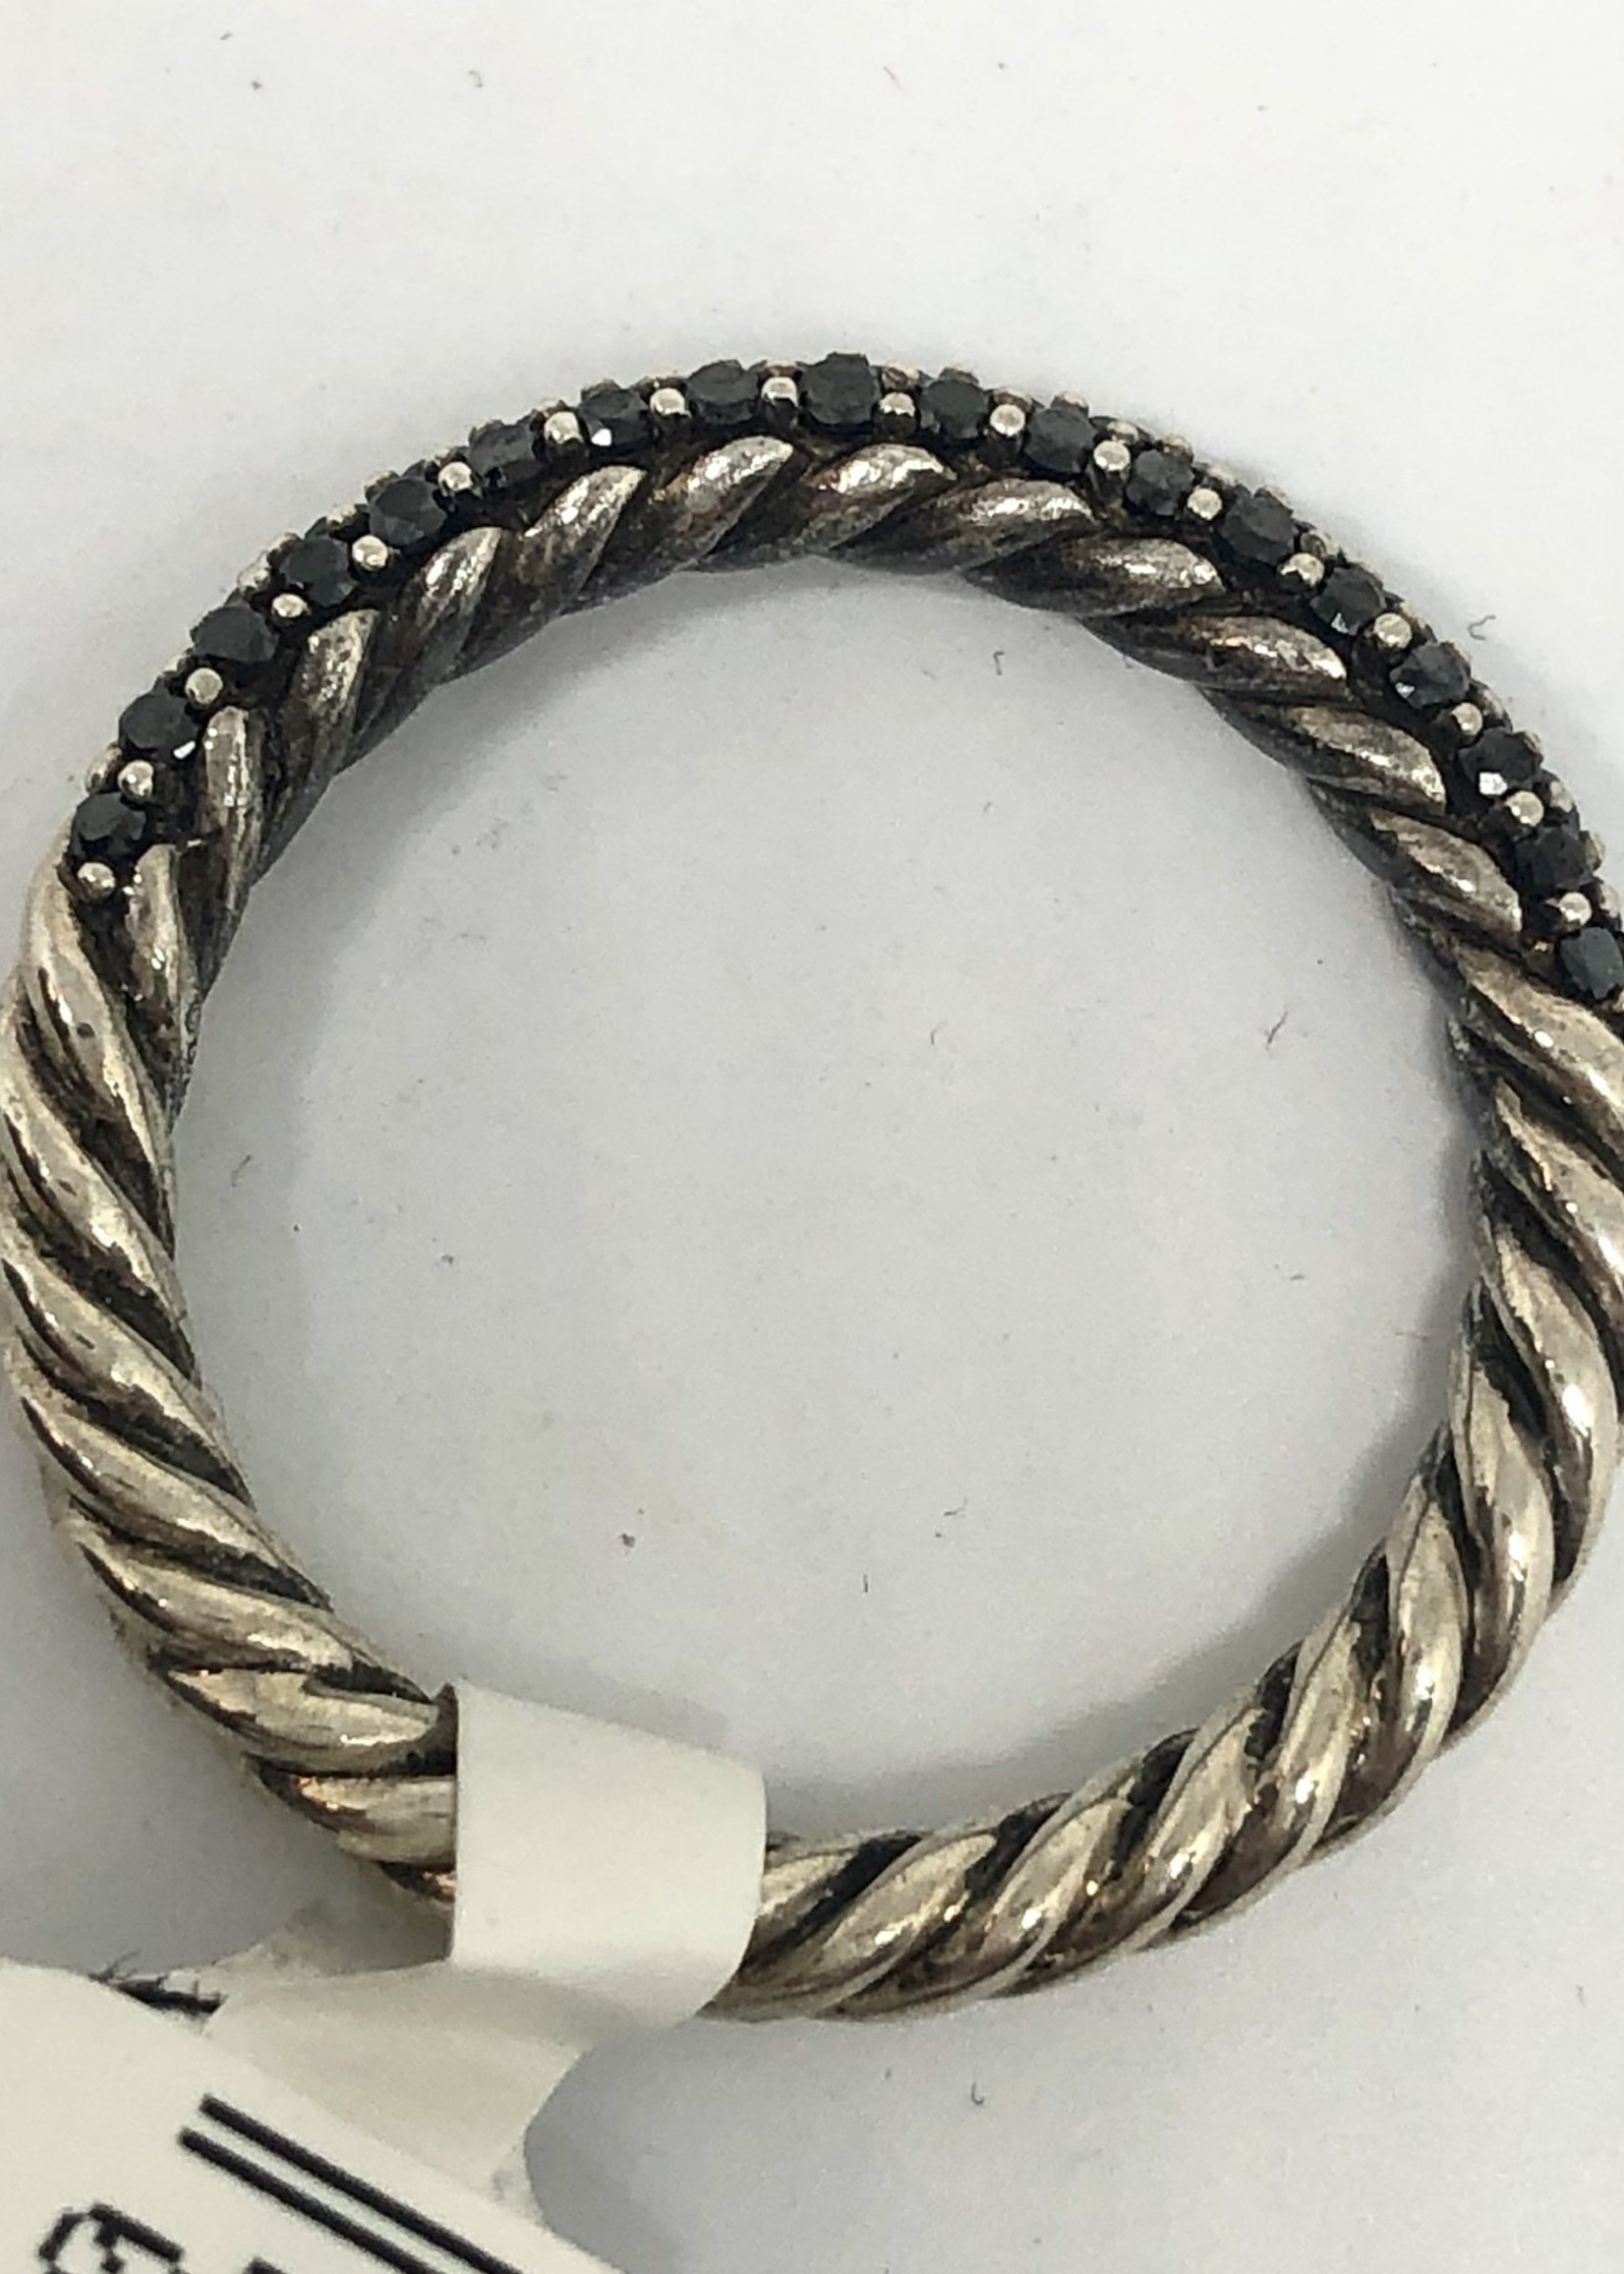 ADT-Sterl 3.1g D-.40tw Bl Dia Yurman Cable Band